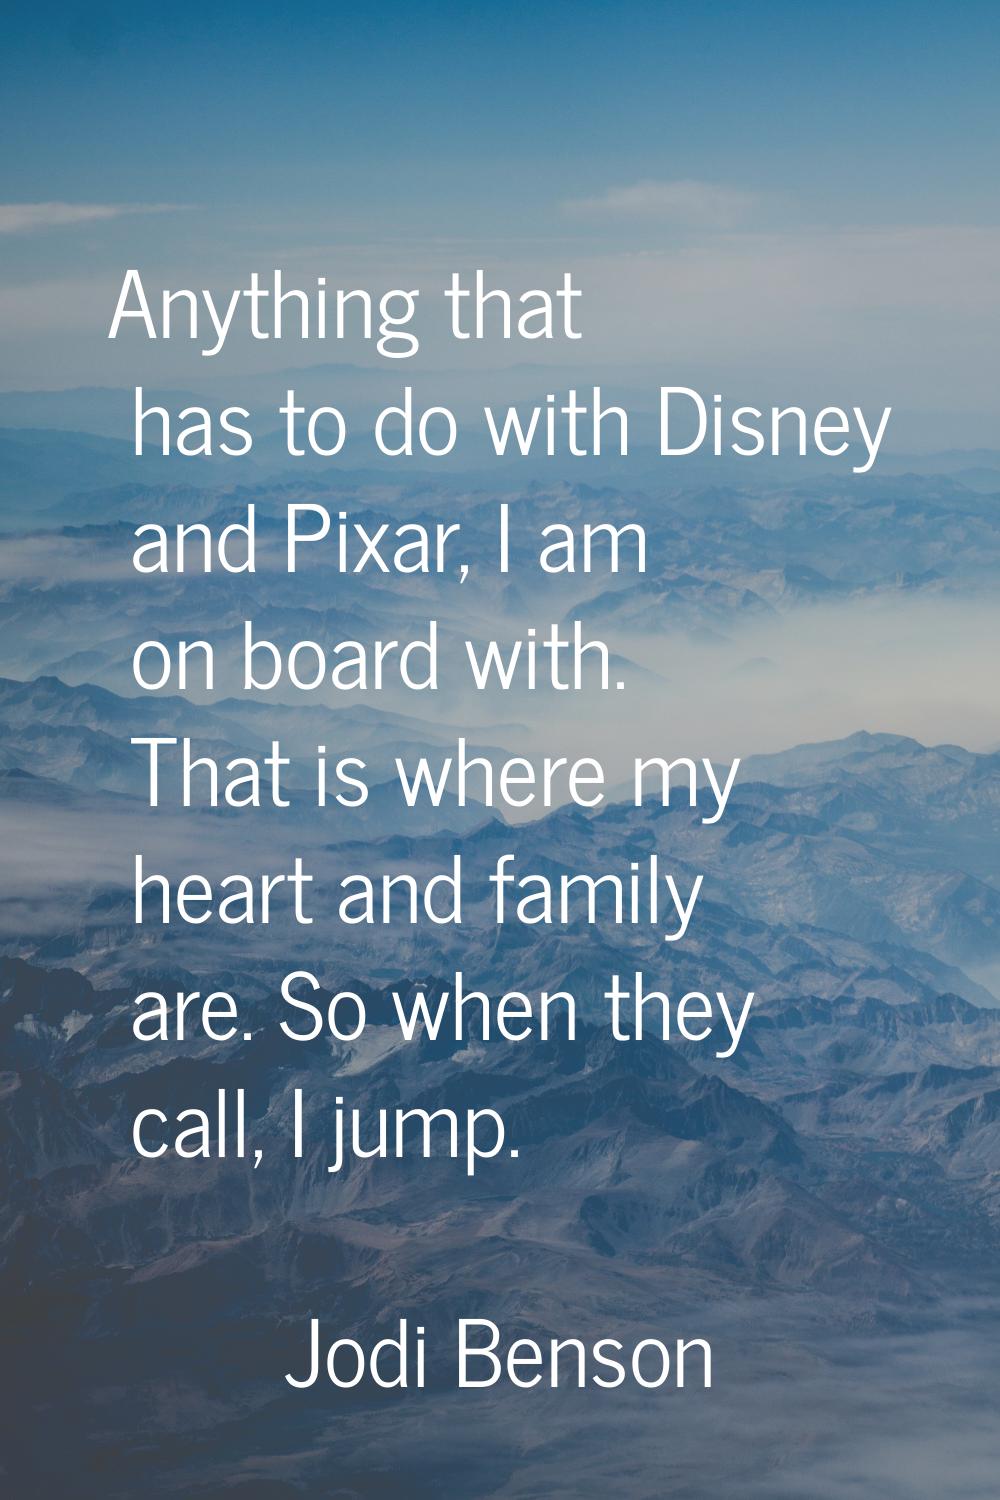 Anything that has to do with Disney and Pixar, I am on board with. That is where my heart and famil